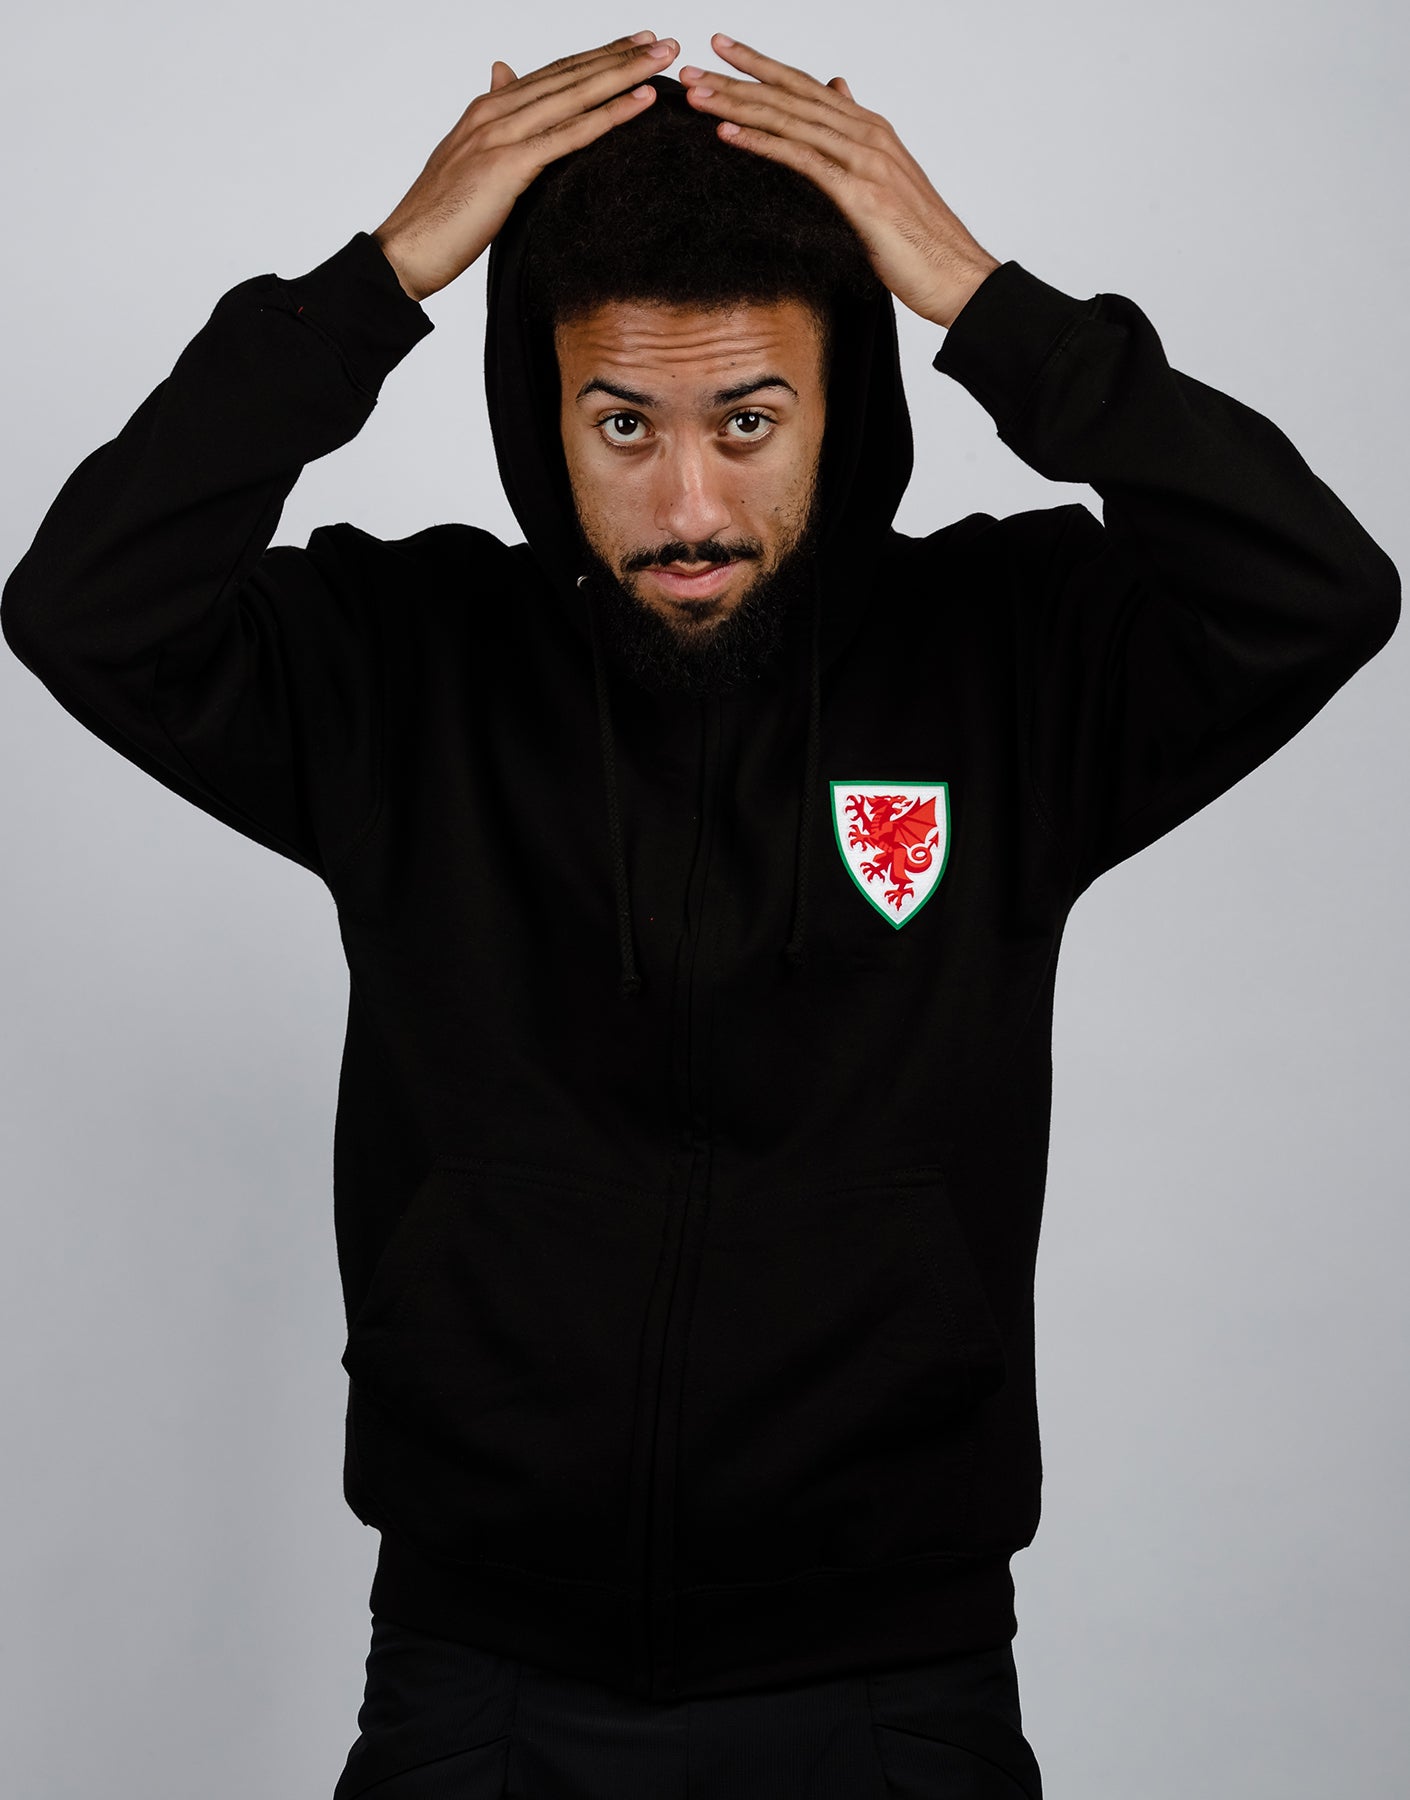 Official Team Wales Full Zip Hoodie - Black - The World Football Store